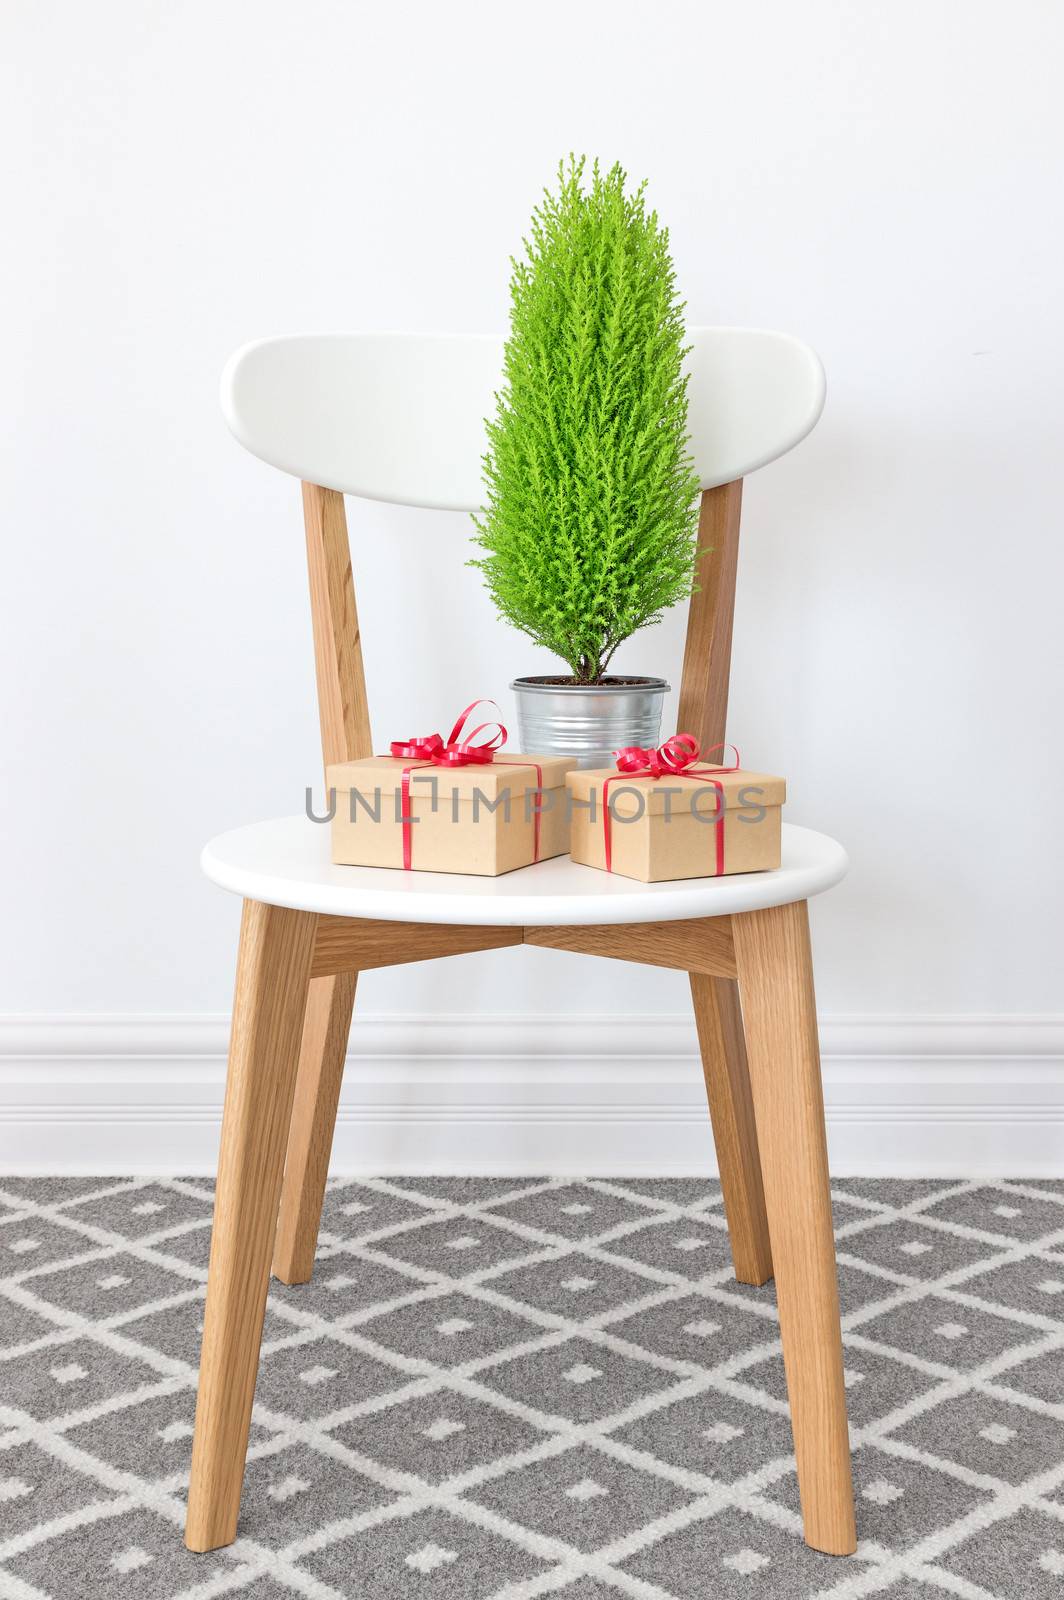 Presents and little green cypress tree on an elegant white chair.